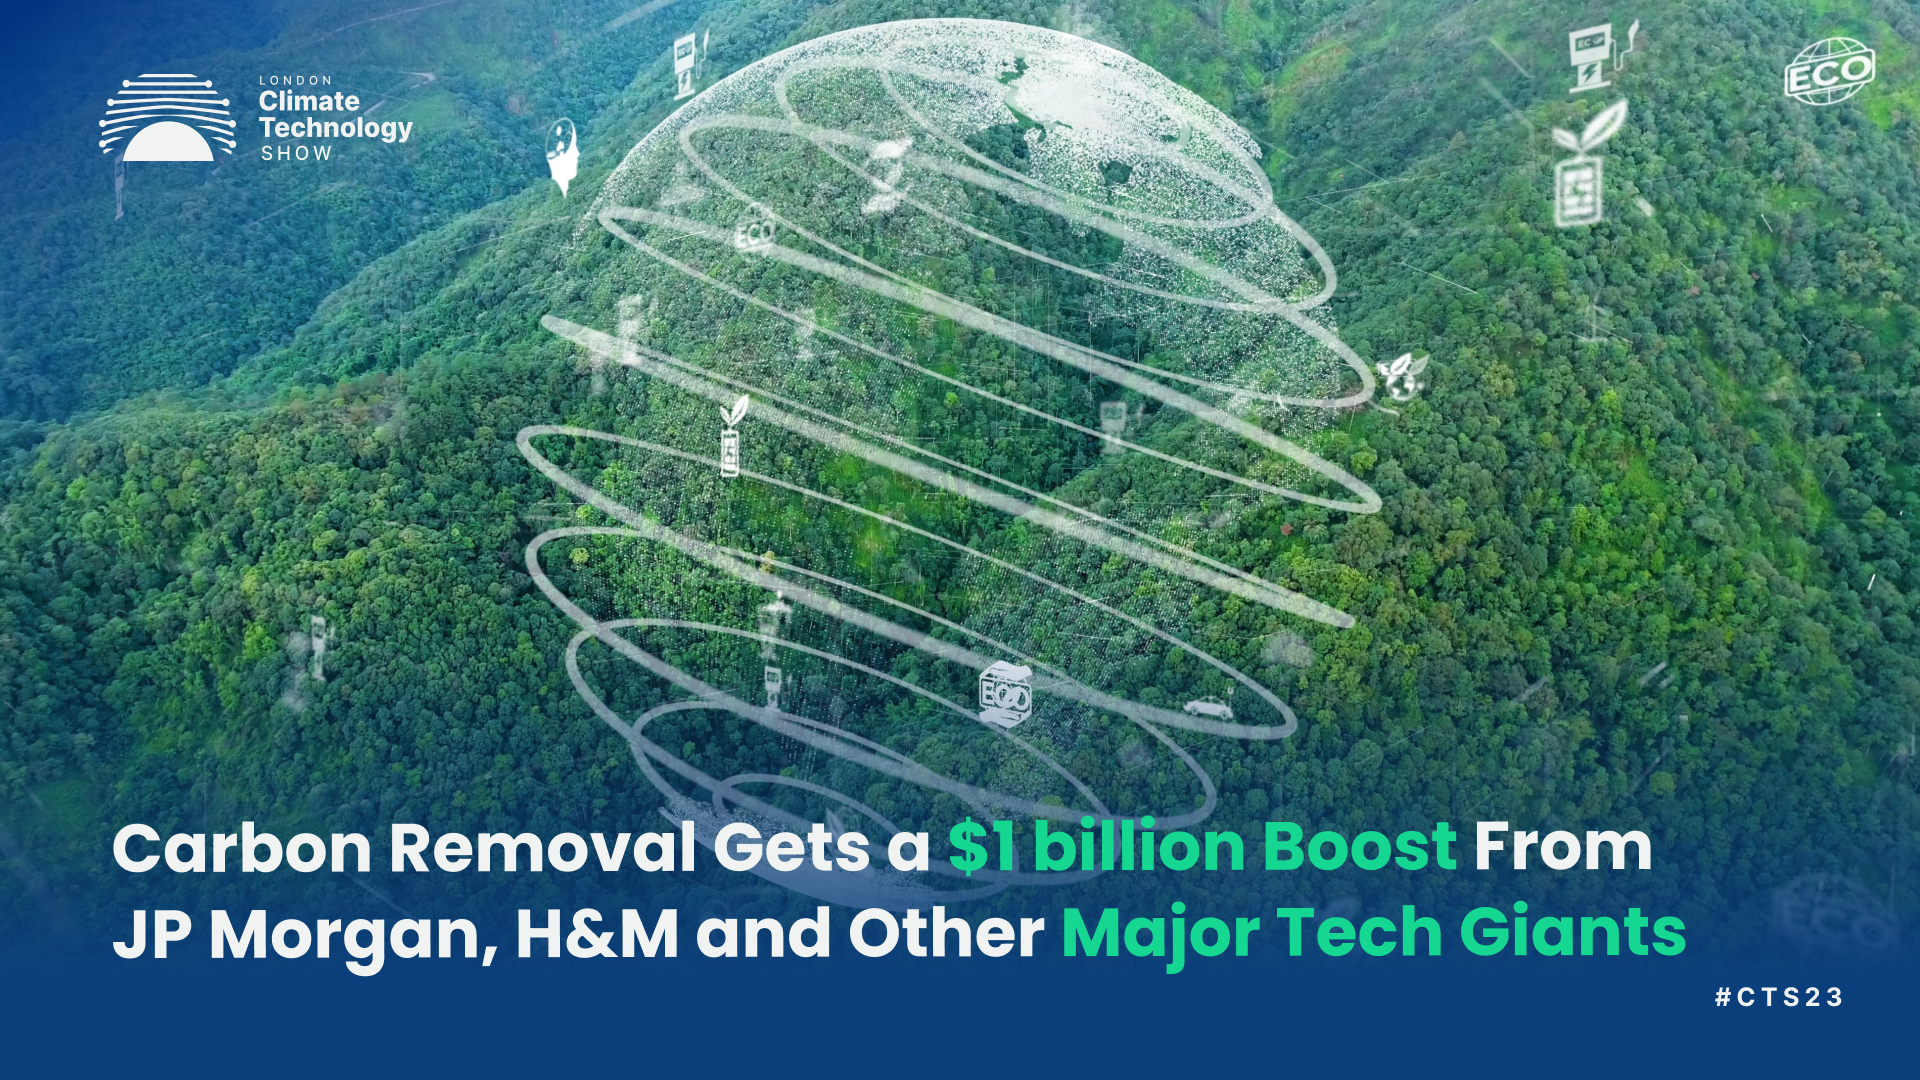 Carbon Removal Gets a $1 billion Boost From JP Morgan, H&M and Other Major Tech Giants